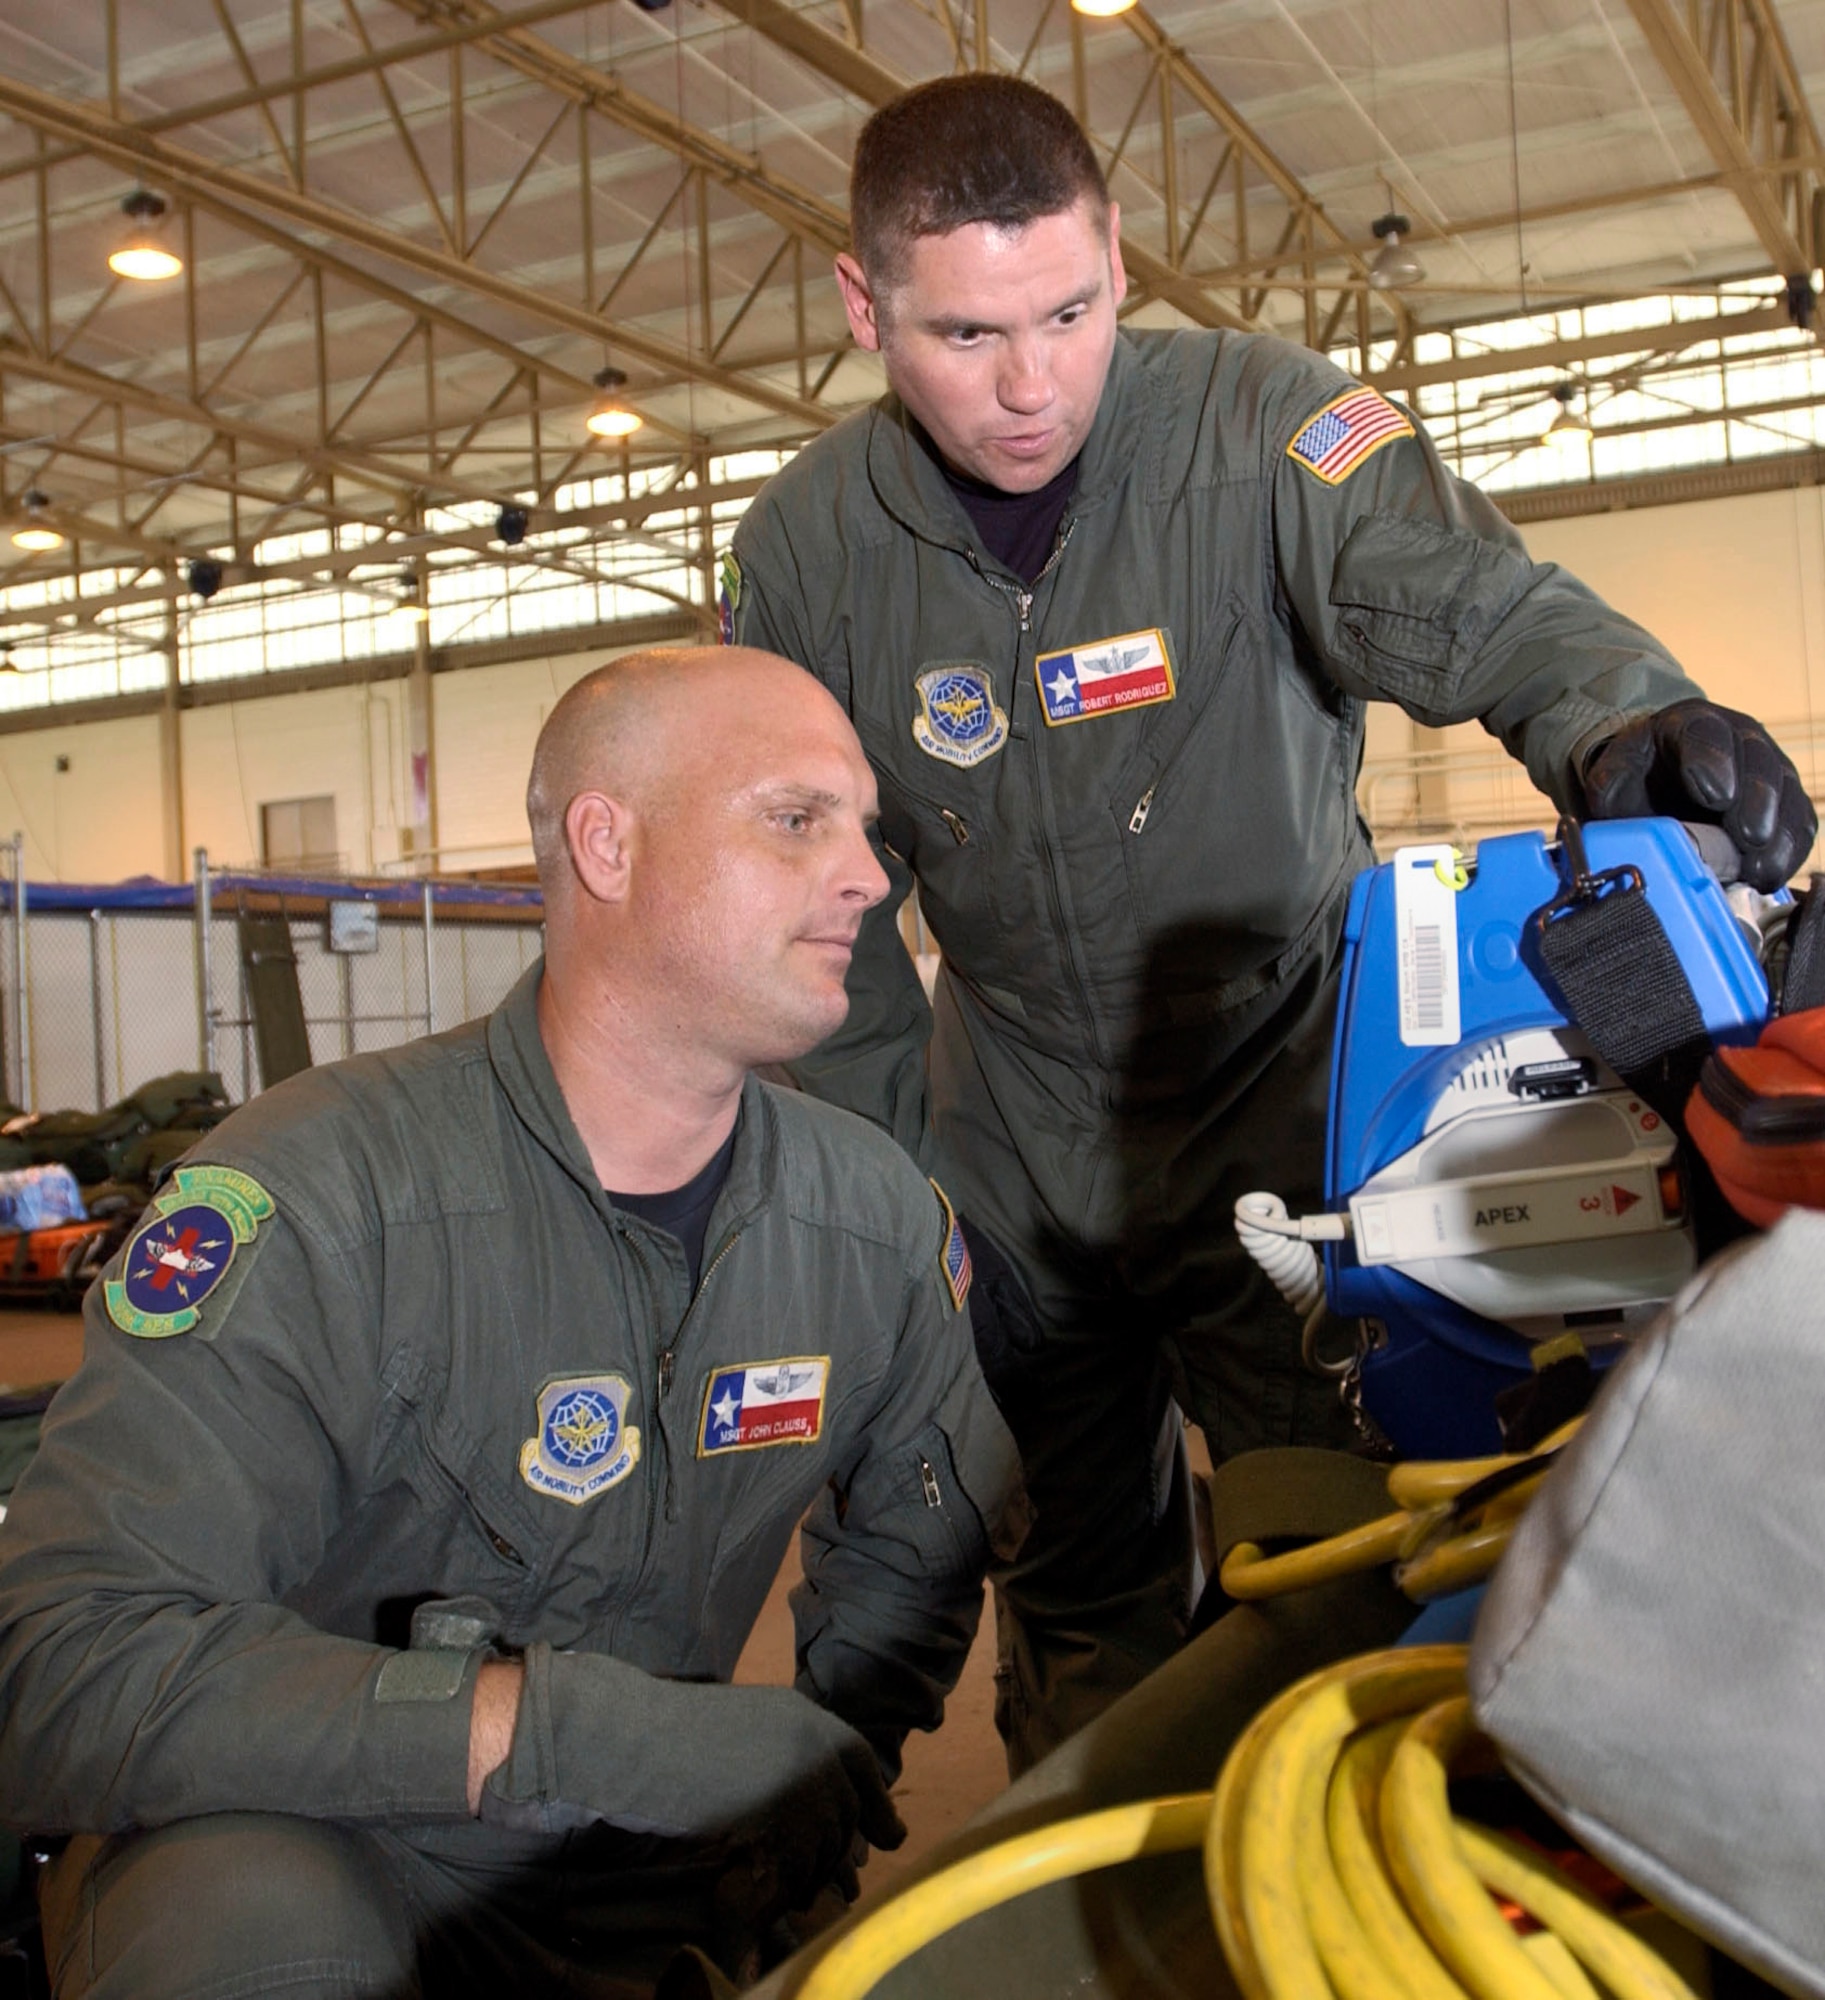 Master Sgts. John Clauss (left) and Rob Rodriguez perform an operational check-up on a defibrillator Sept. 5, 2005. The two flying medics helped aeromedical evacuation teams organize and load their equipment for flights to New Orleans to help evacuate victims of Hurricane Katrina. They are with the 433rd Airlift Wing at Lackland Air Force Base, Texas. (U.S. Air Force photo/Master Sgt. Jason Tudor)